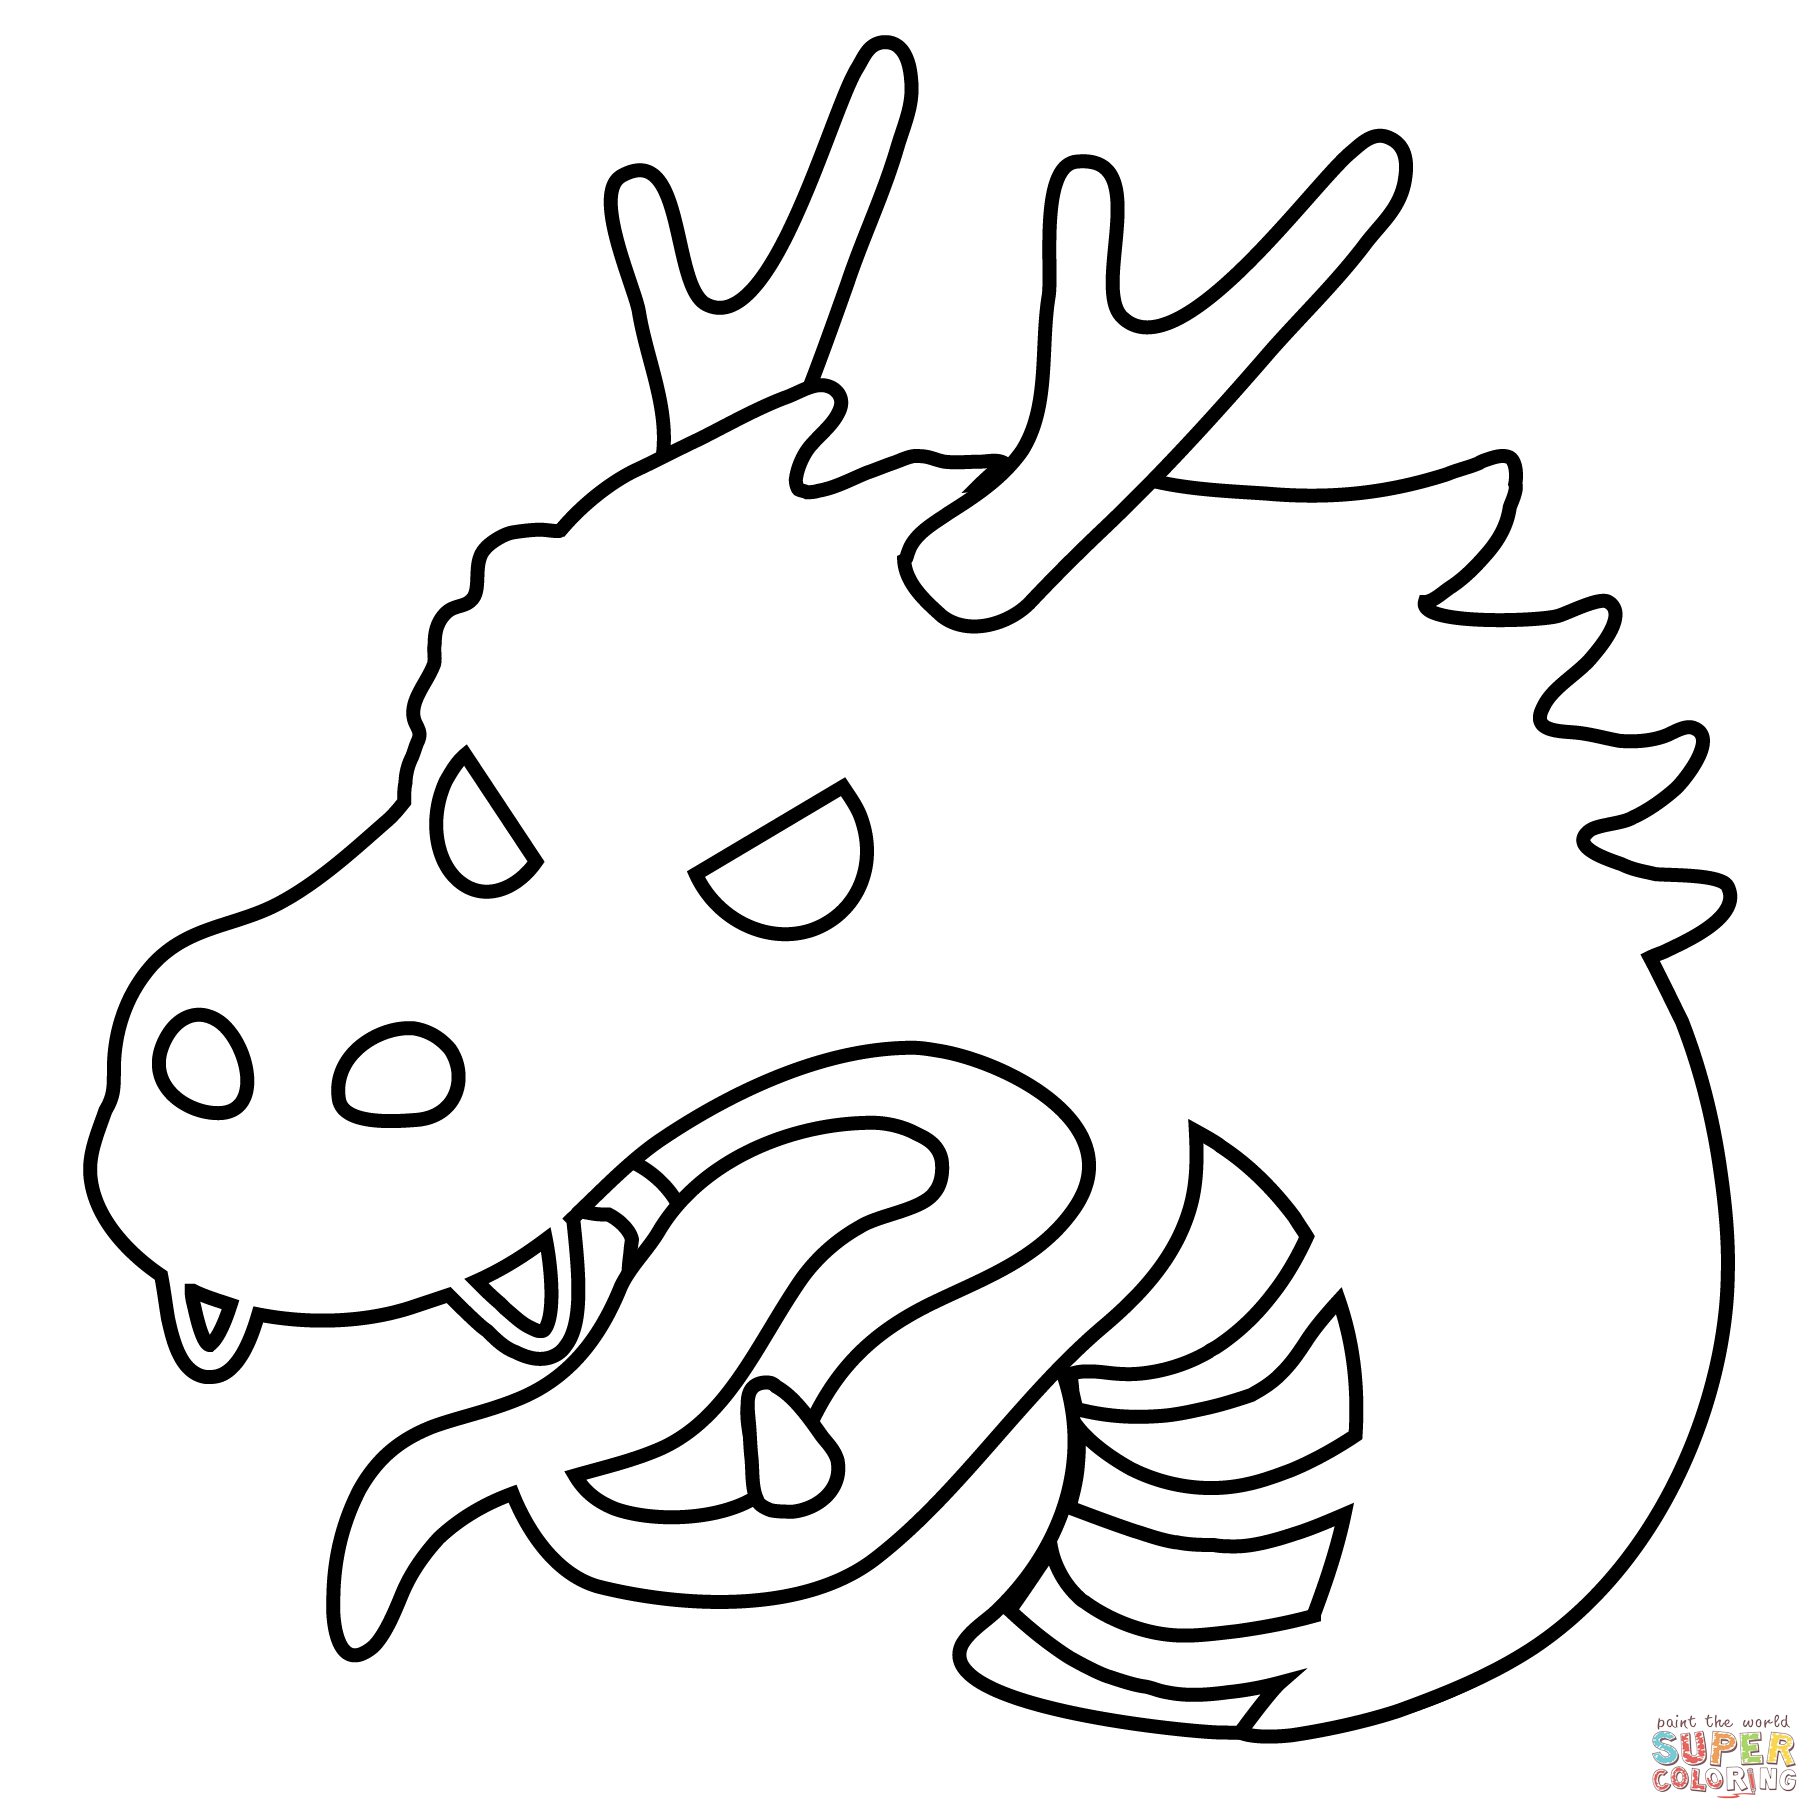 Dragon face emoji coloring page free printable coloring pages